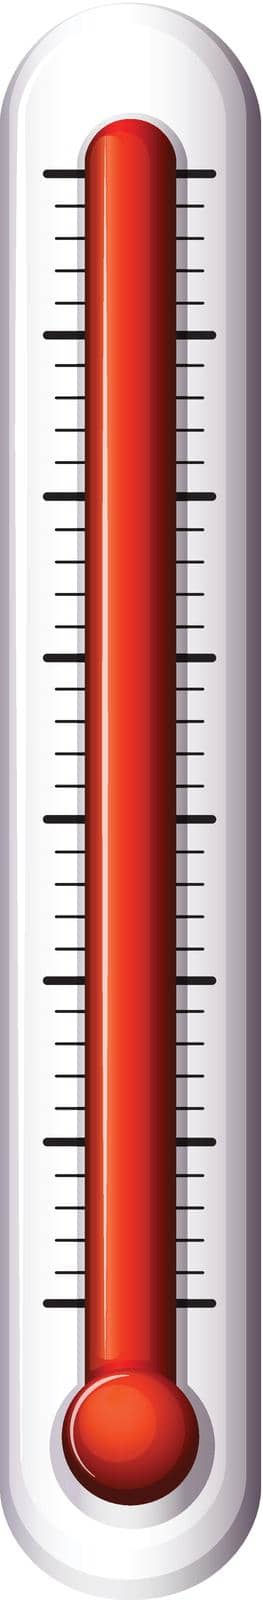 Illustration of a measuring device for temperature on a white background